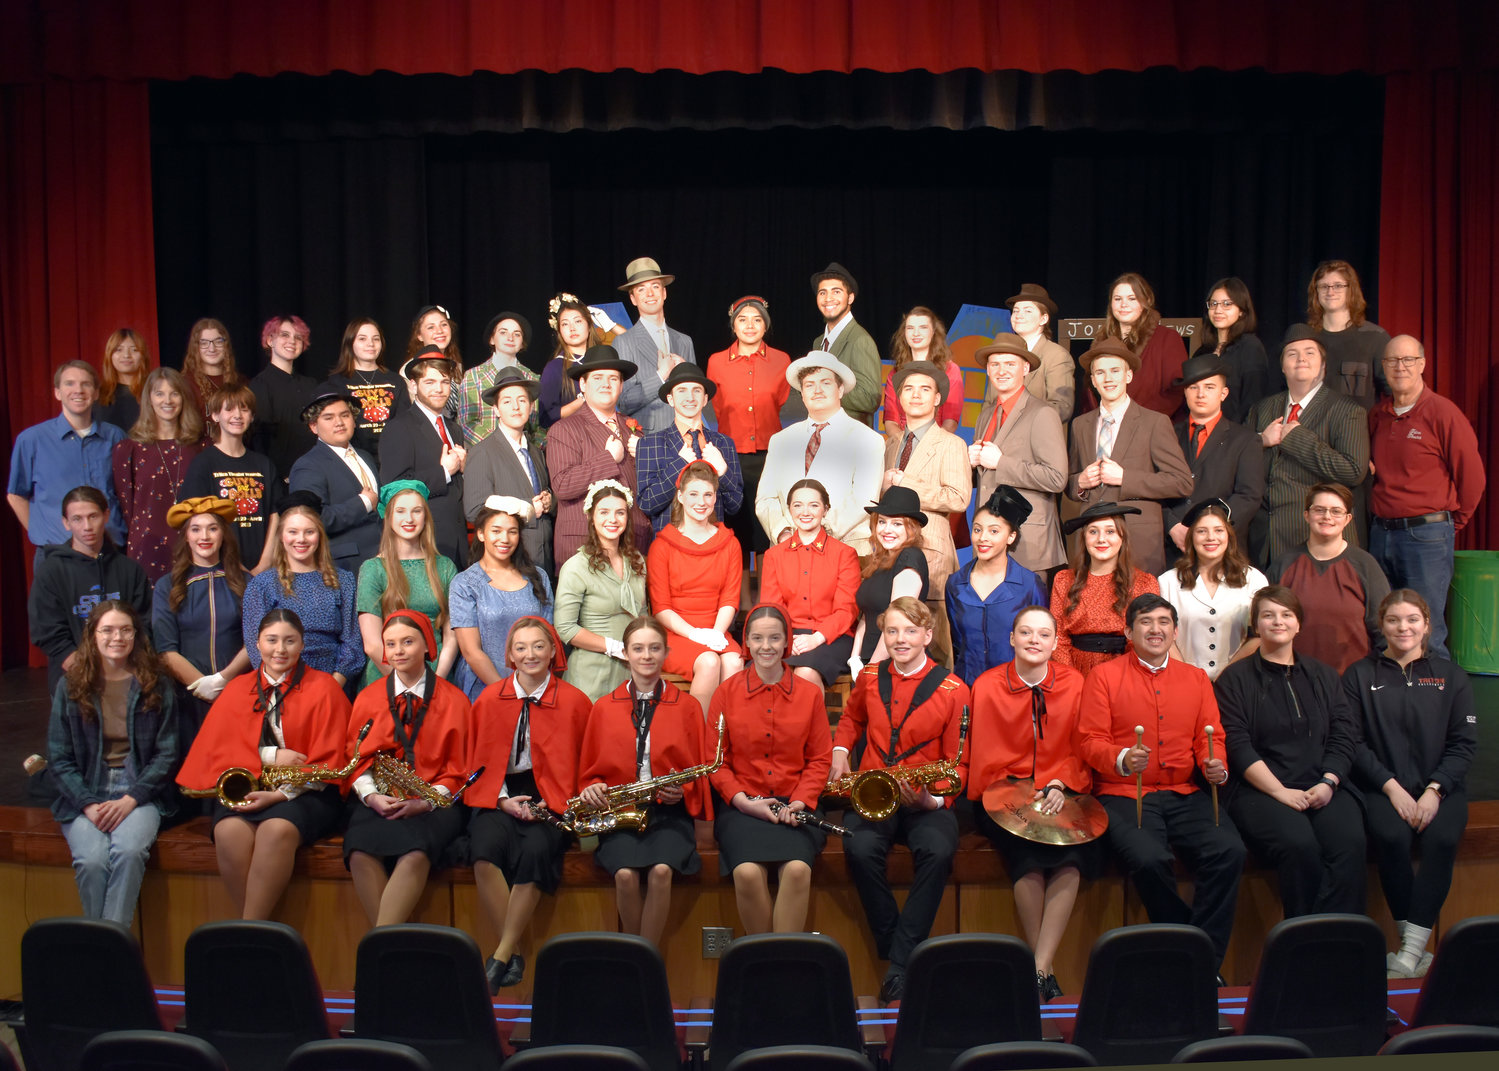 Triton High School Presented Guys and Dolls as their Spring Musical. Pictured is the full cast.